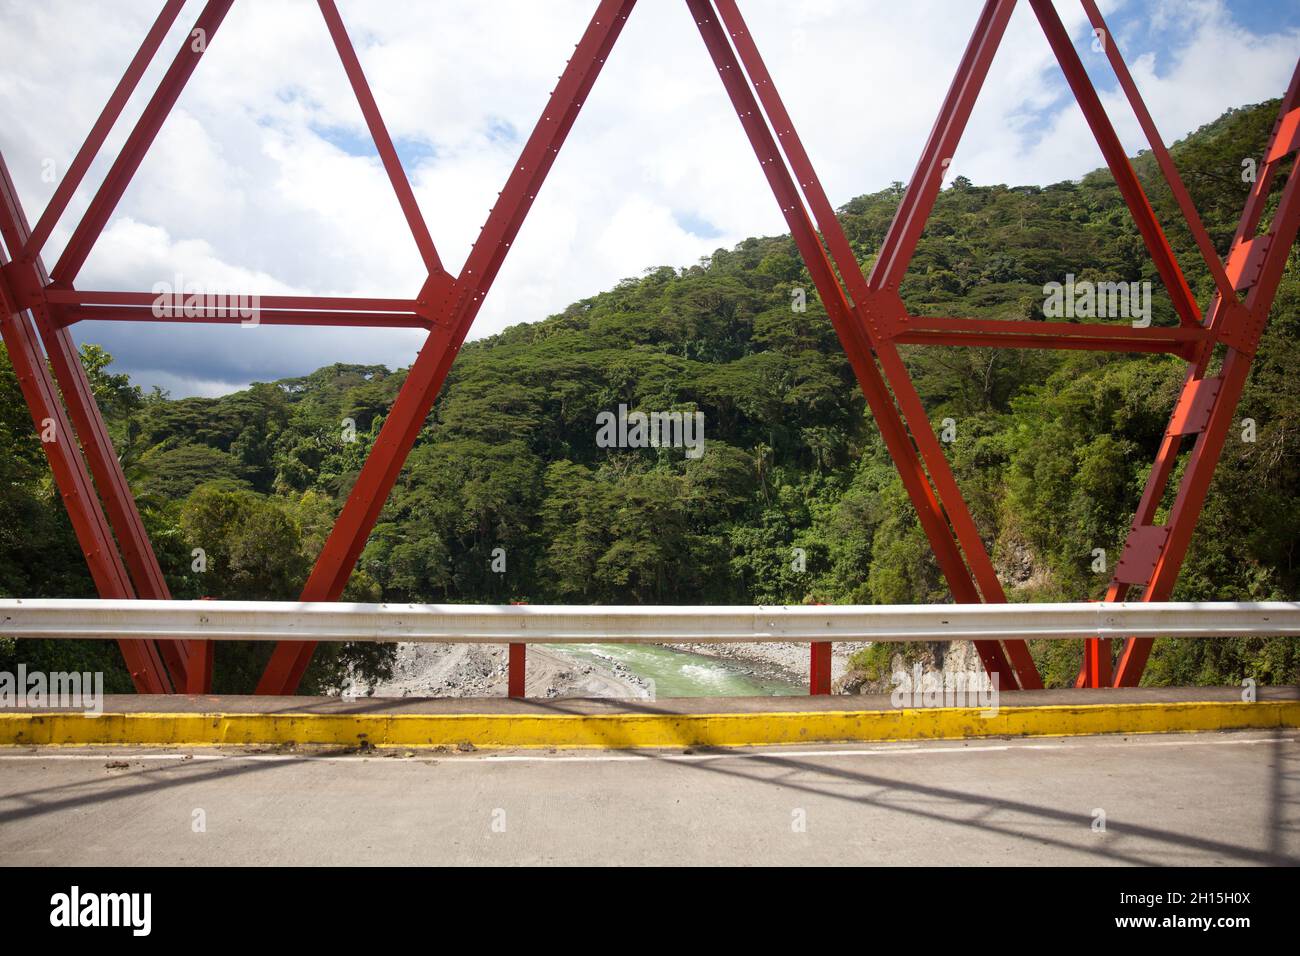 Steel structure bridge close-up. Concrete road and bridge with red beams. Stock Photo